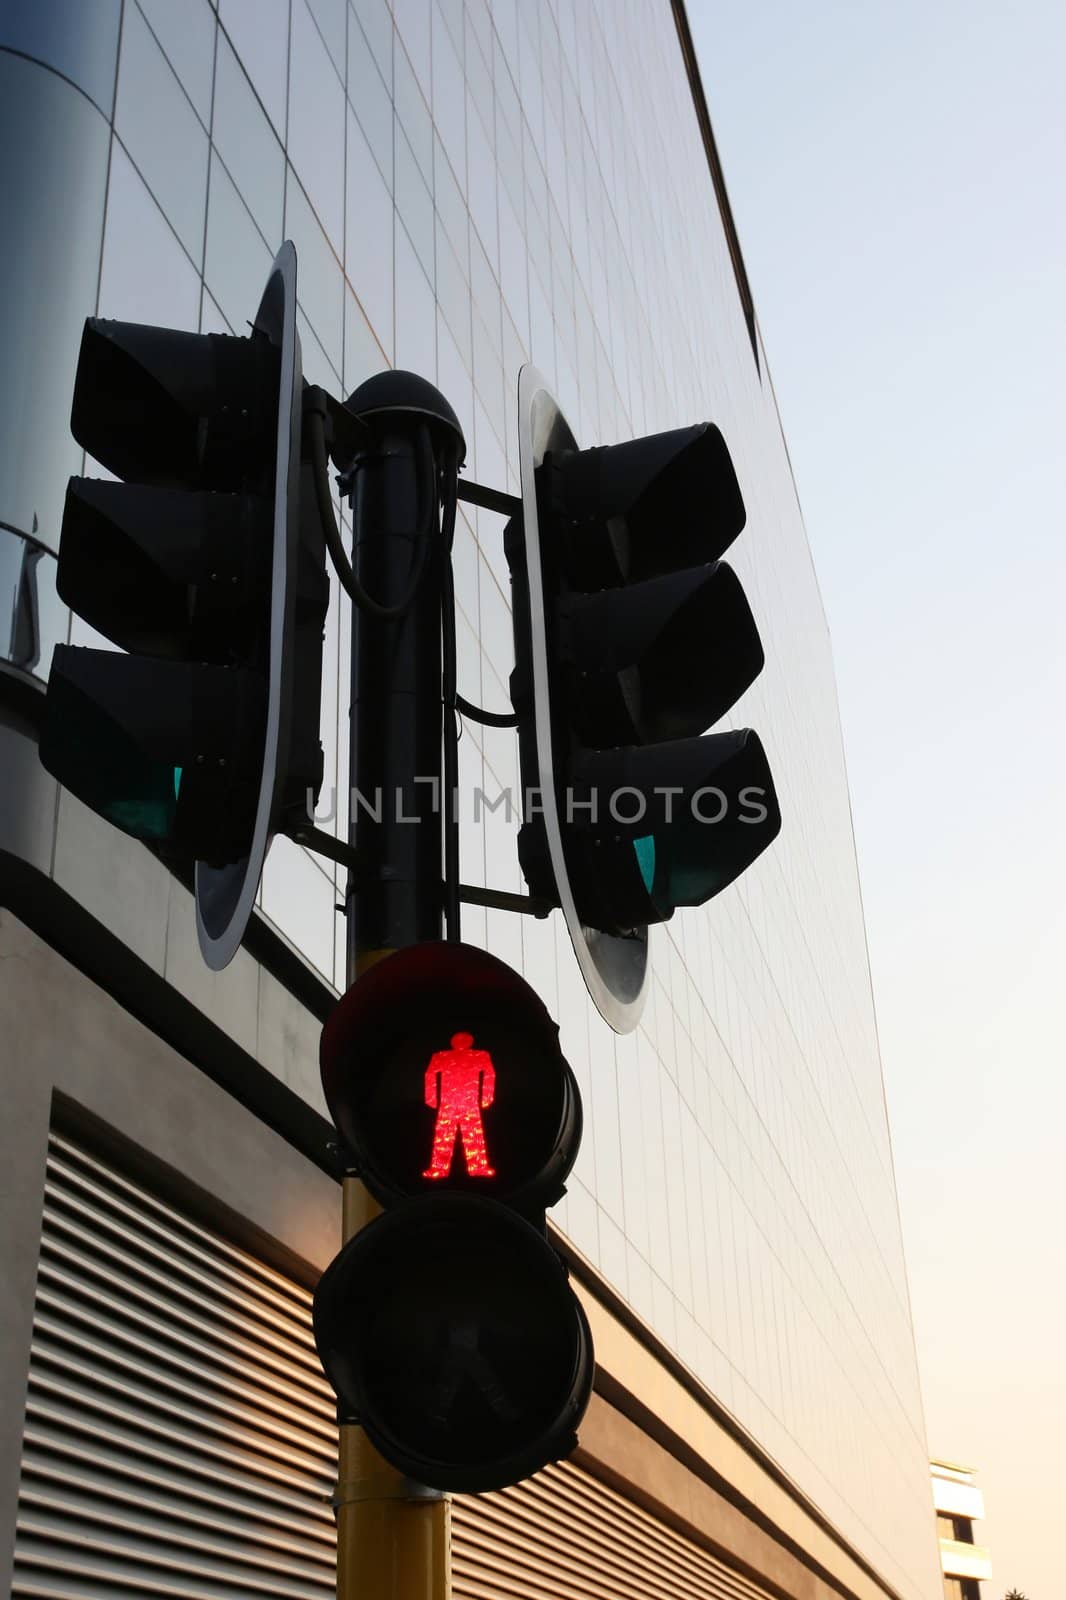 Traffic control lights with red for pedestrian crossing against modern building